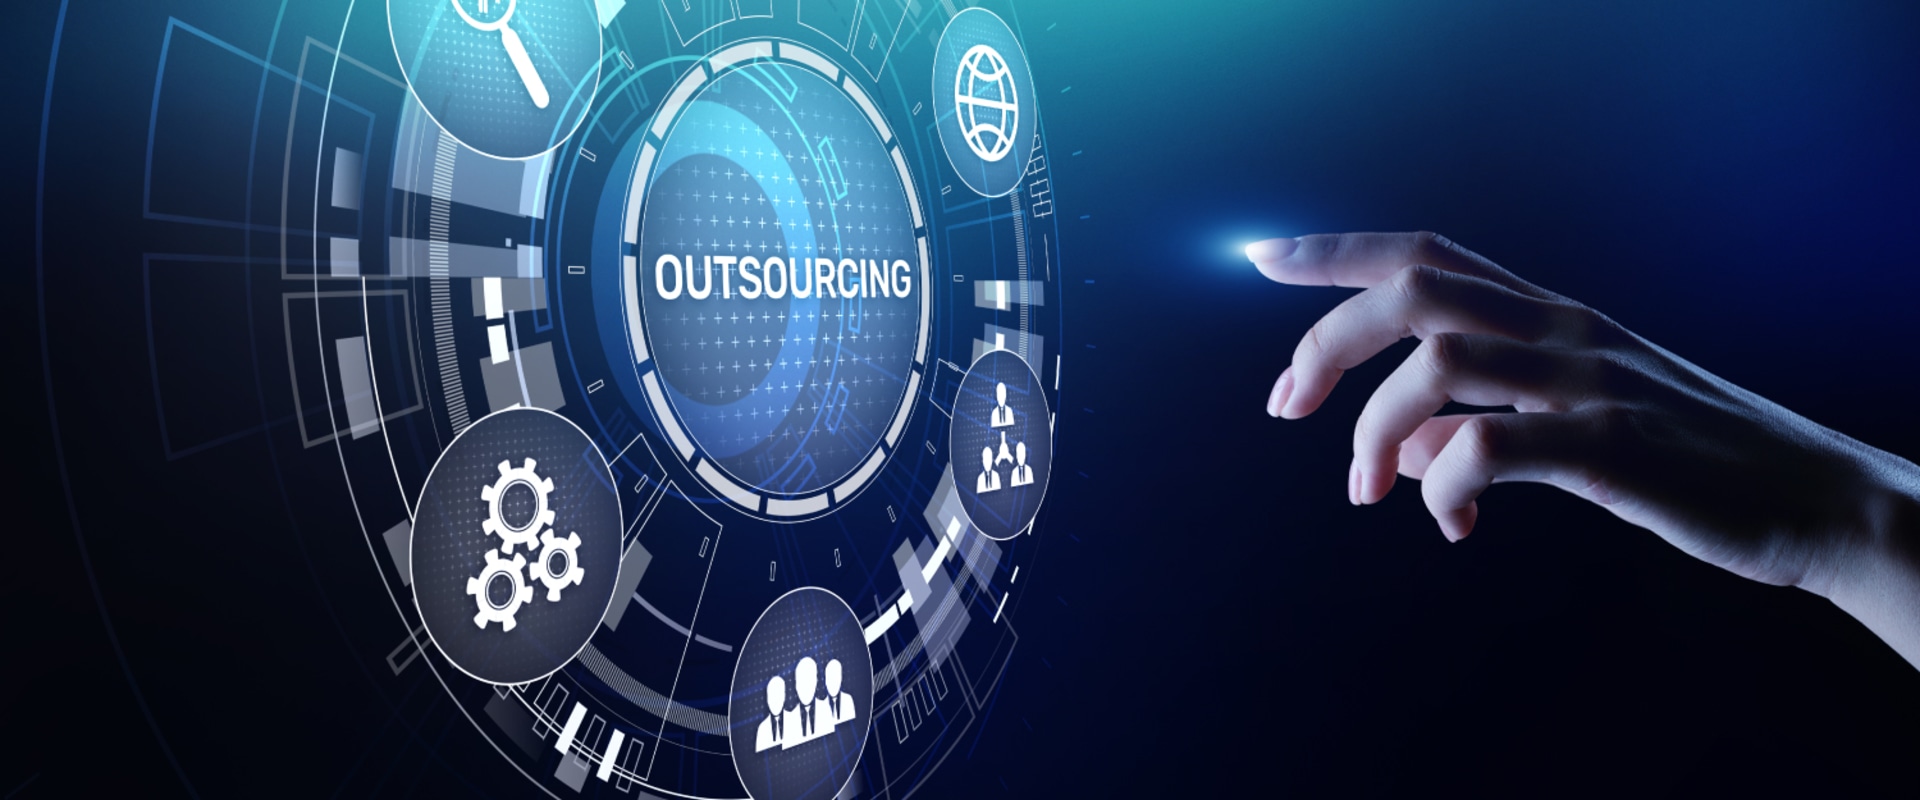 What are the disadvantages of outsourcing?